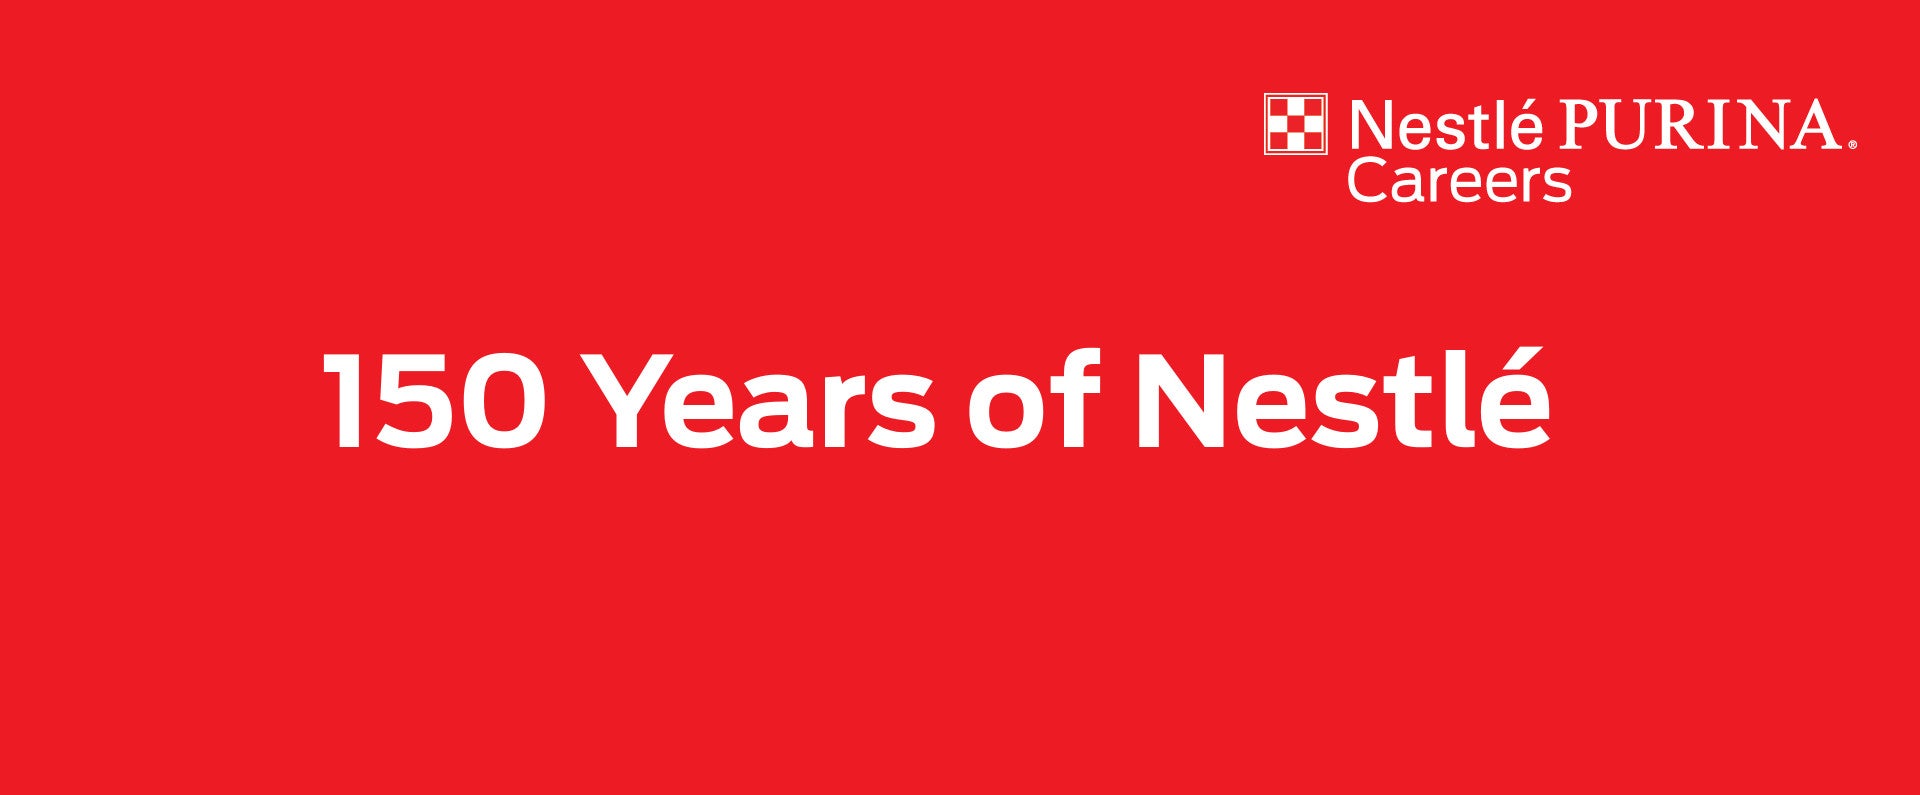 150 Years of Nestlé